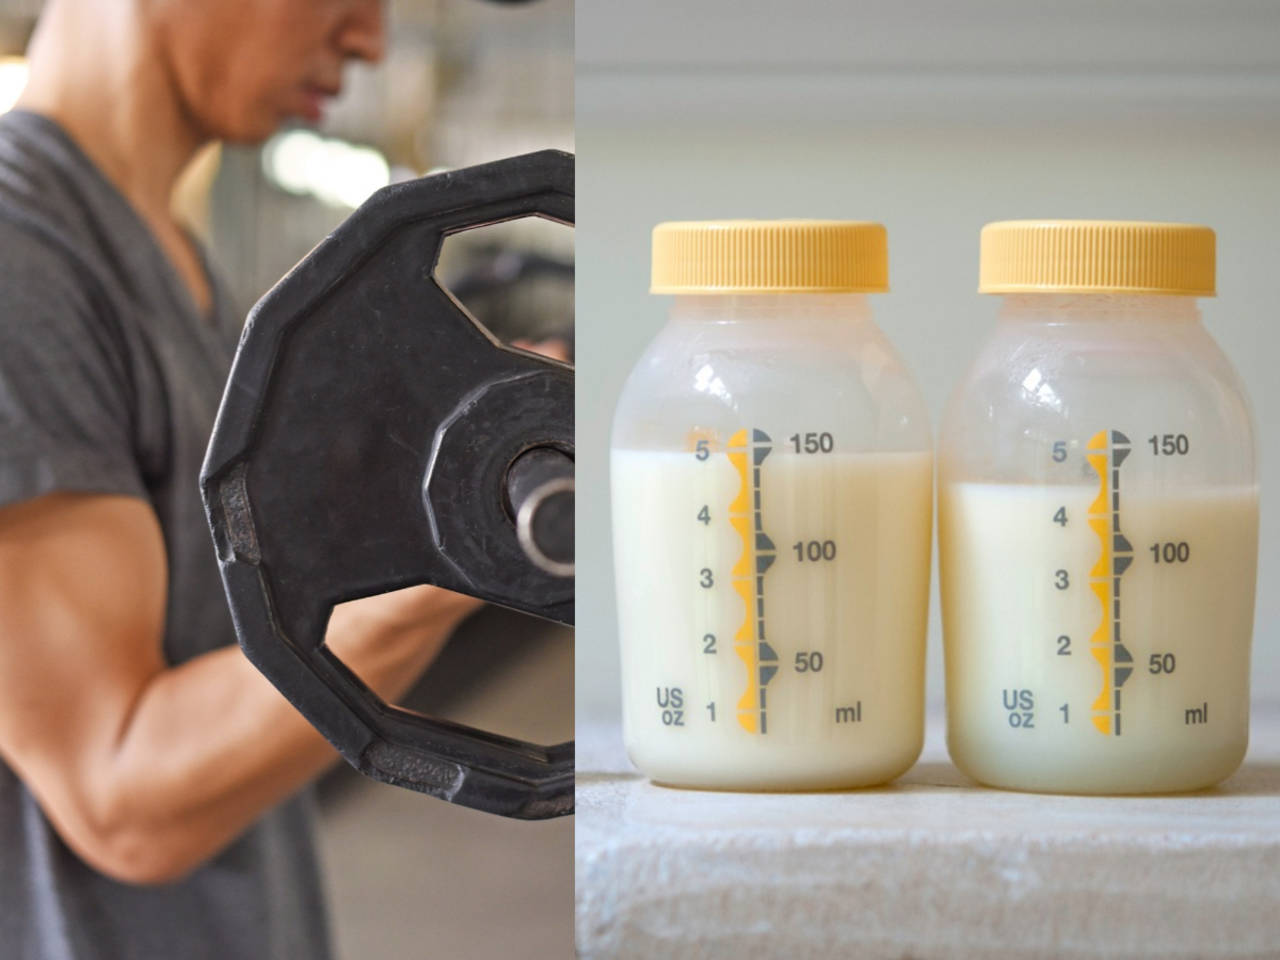 Shocking! Some men are now drinking breastmilk to build muscles photo